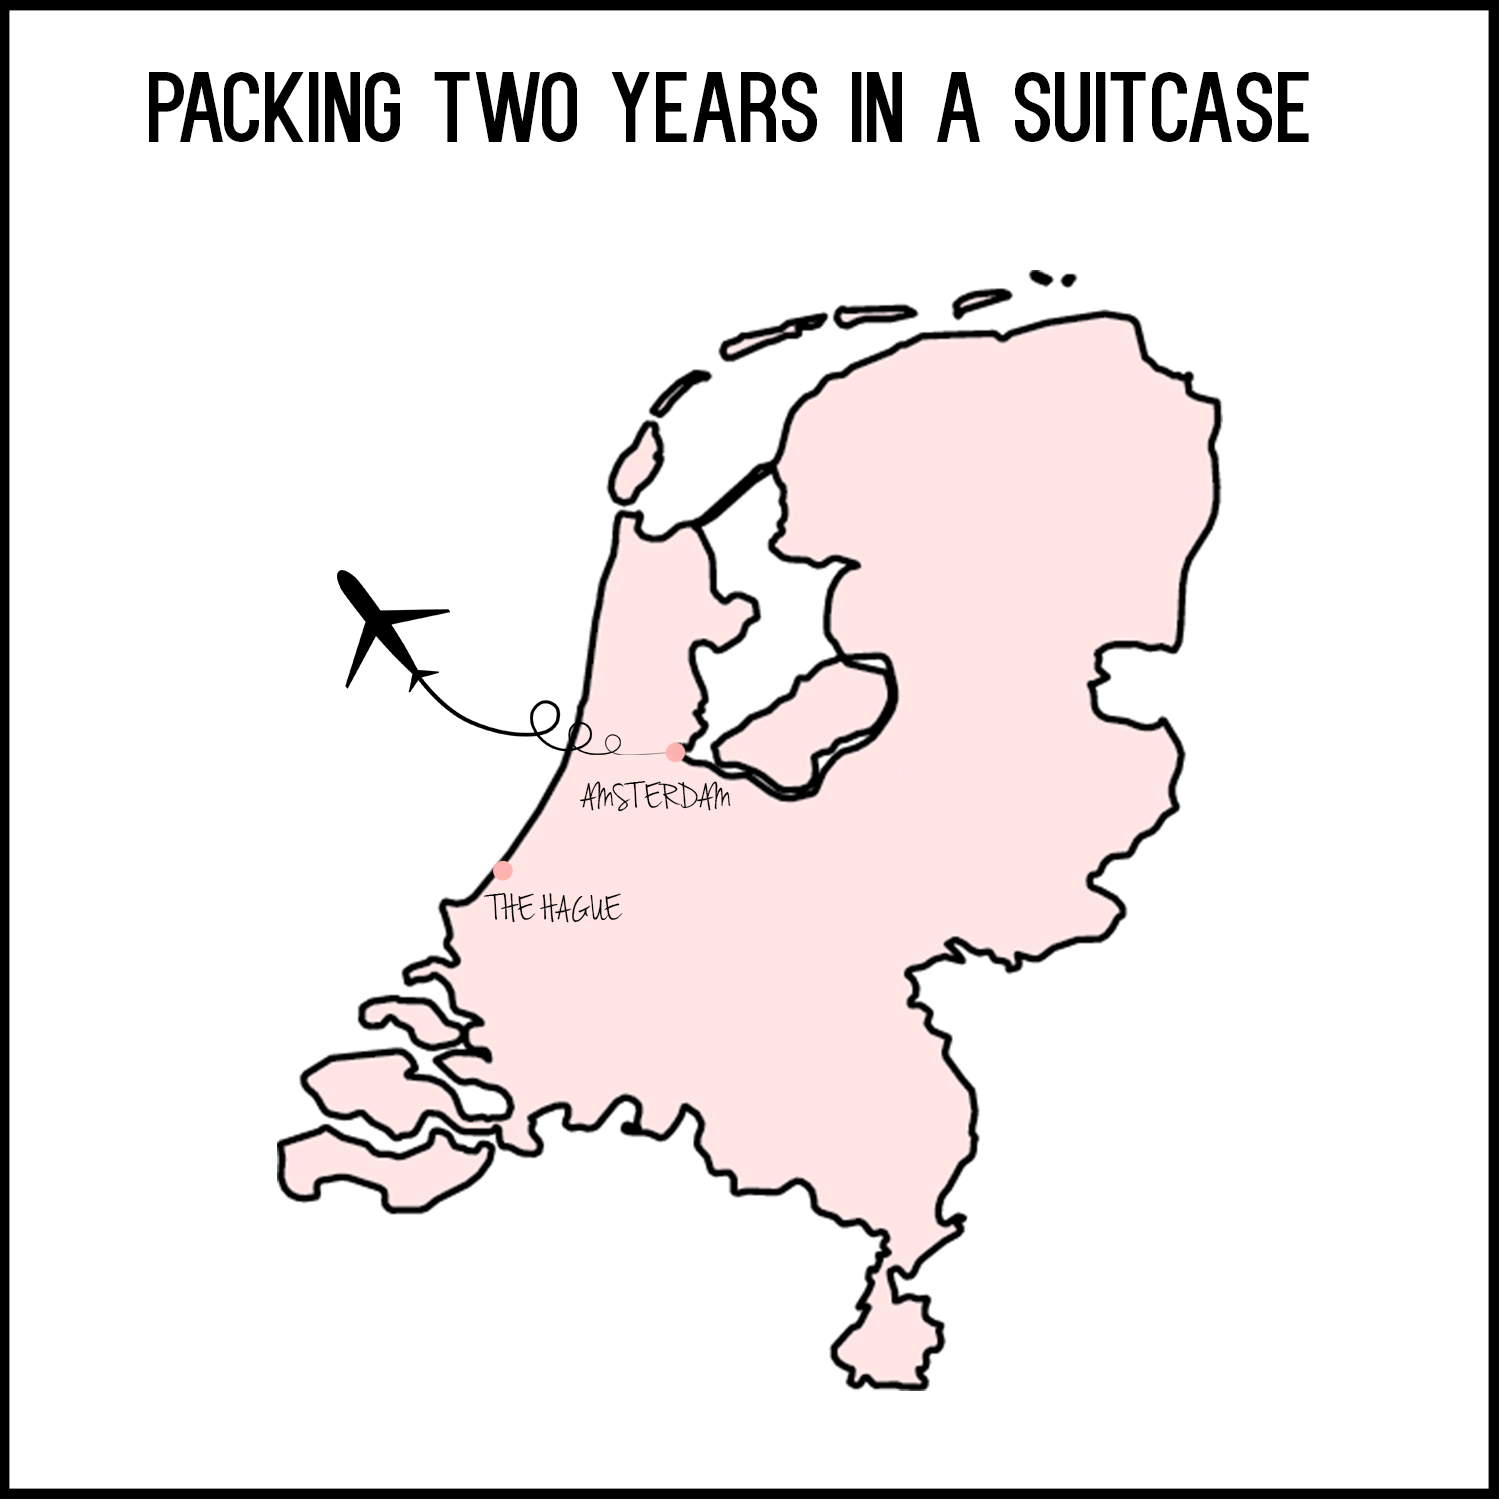 Packing two years in a suitcase. Amsterdam. The Hague